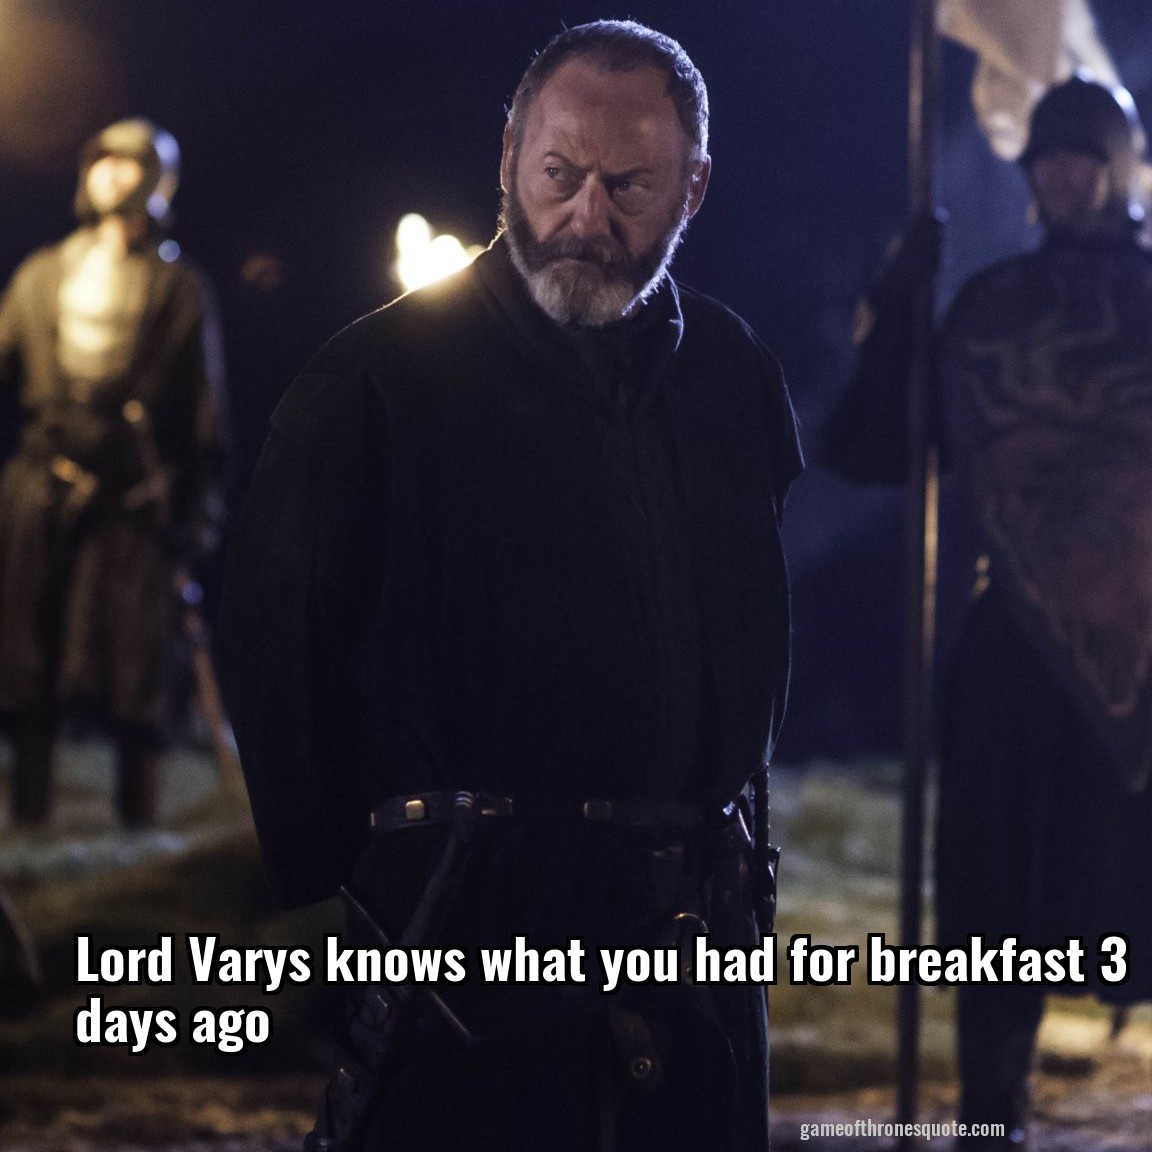 Lord Varys knows what you had for breakfast 3 days ago